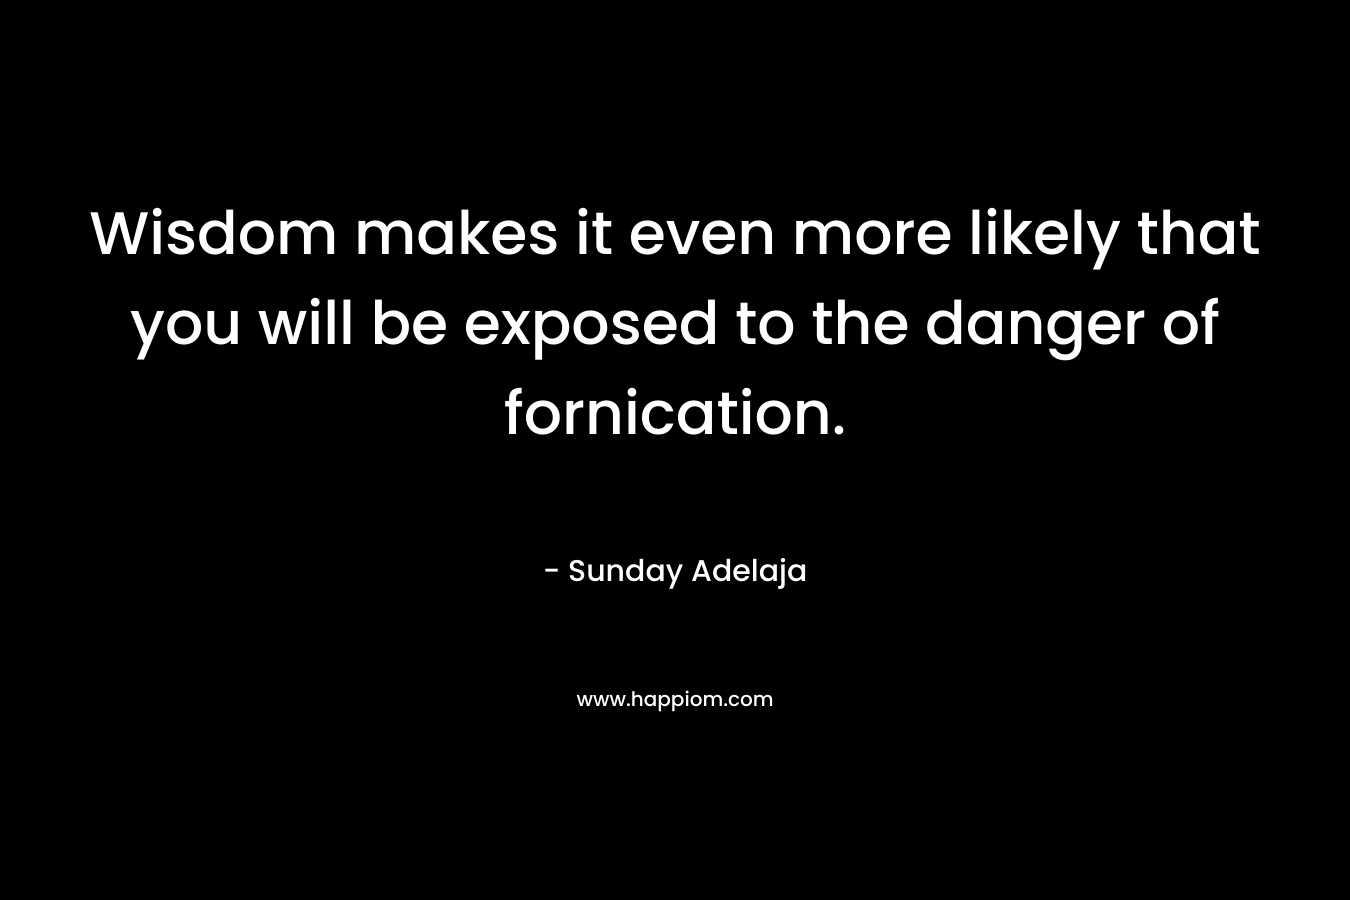 Wisdom makes it even more likely that you will be exposed to the danger of fornication. – Sunday Adelaja